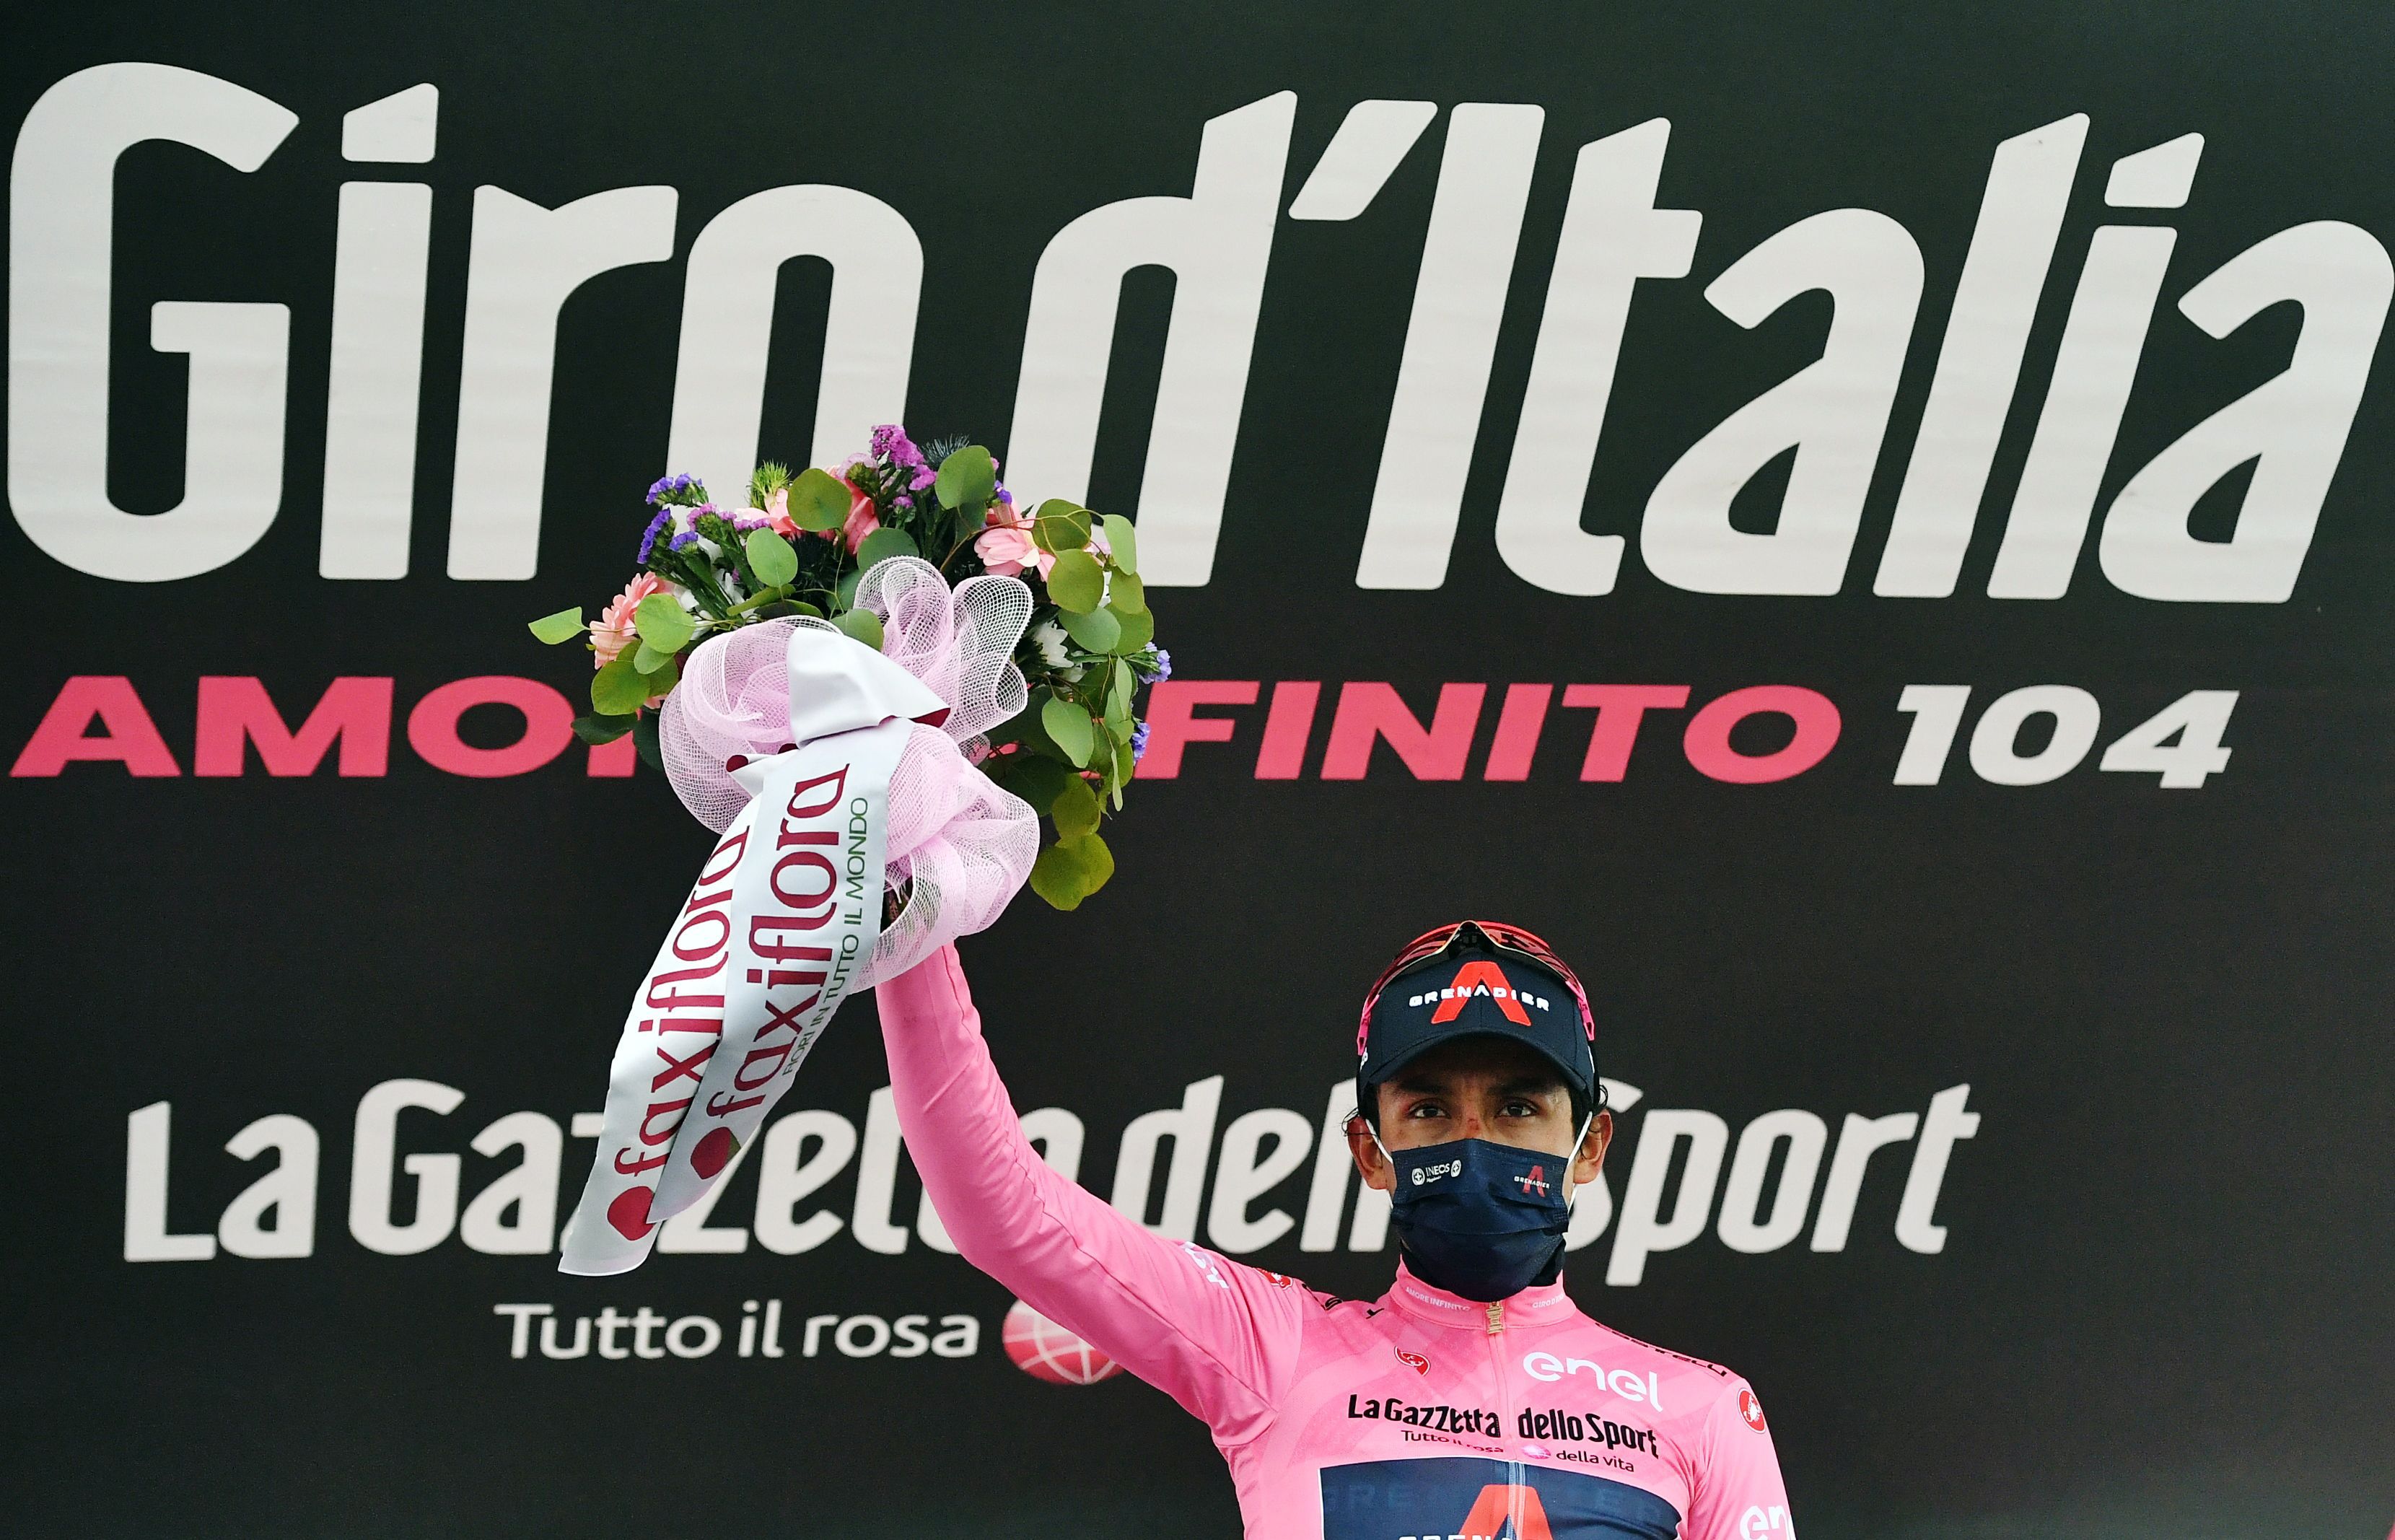 Cycling - Giro d'Italia - Stage 14 - Cittadella to Monte Zoncolan, Italy - May 22, 2021 Ineos Grenadiers rider Egan Arley Bernal Gomez of Colombia celebrates wearing the maglia rosa on the podium after stage 14 REUTERS/Jennifer Lorenzini